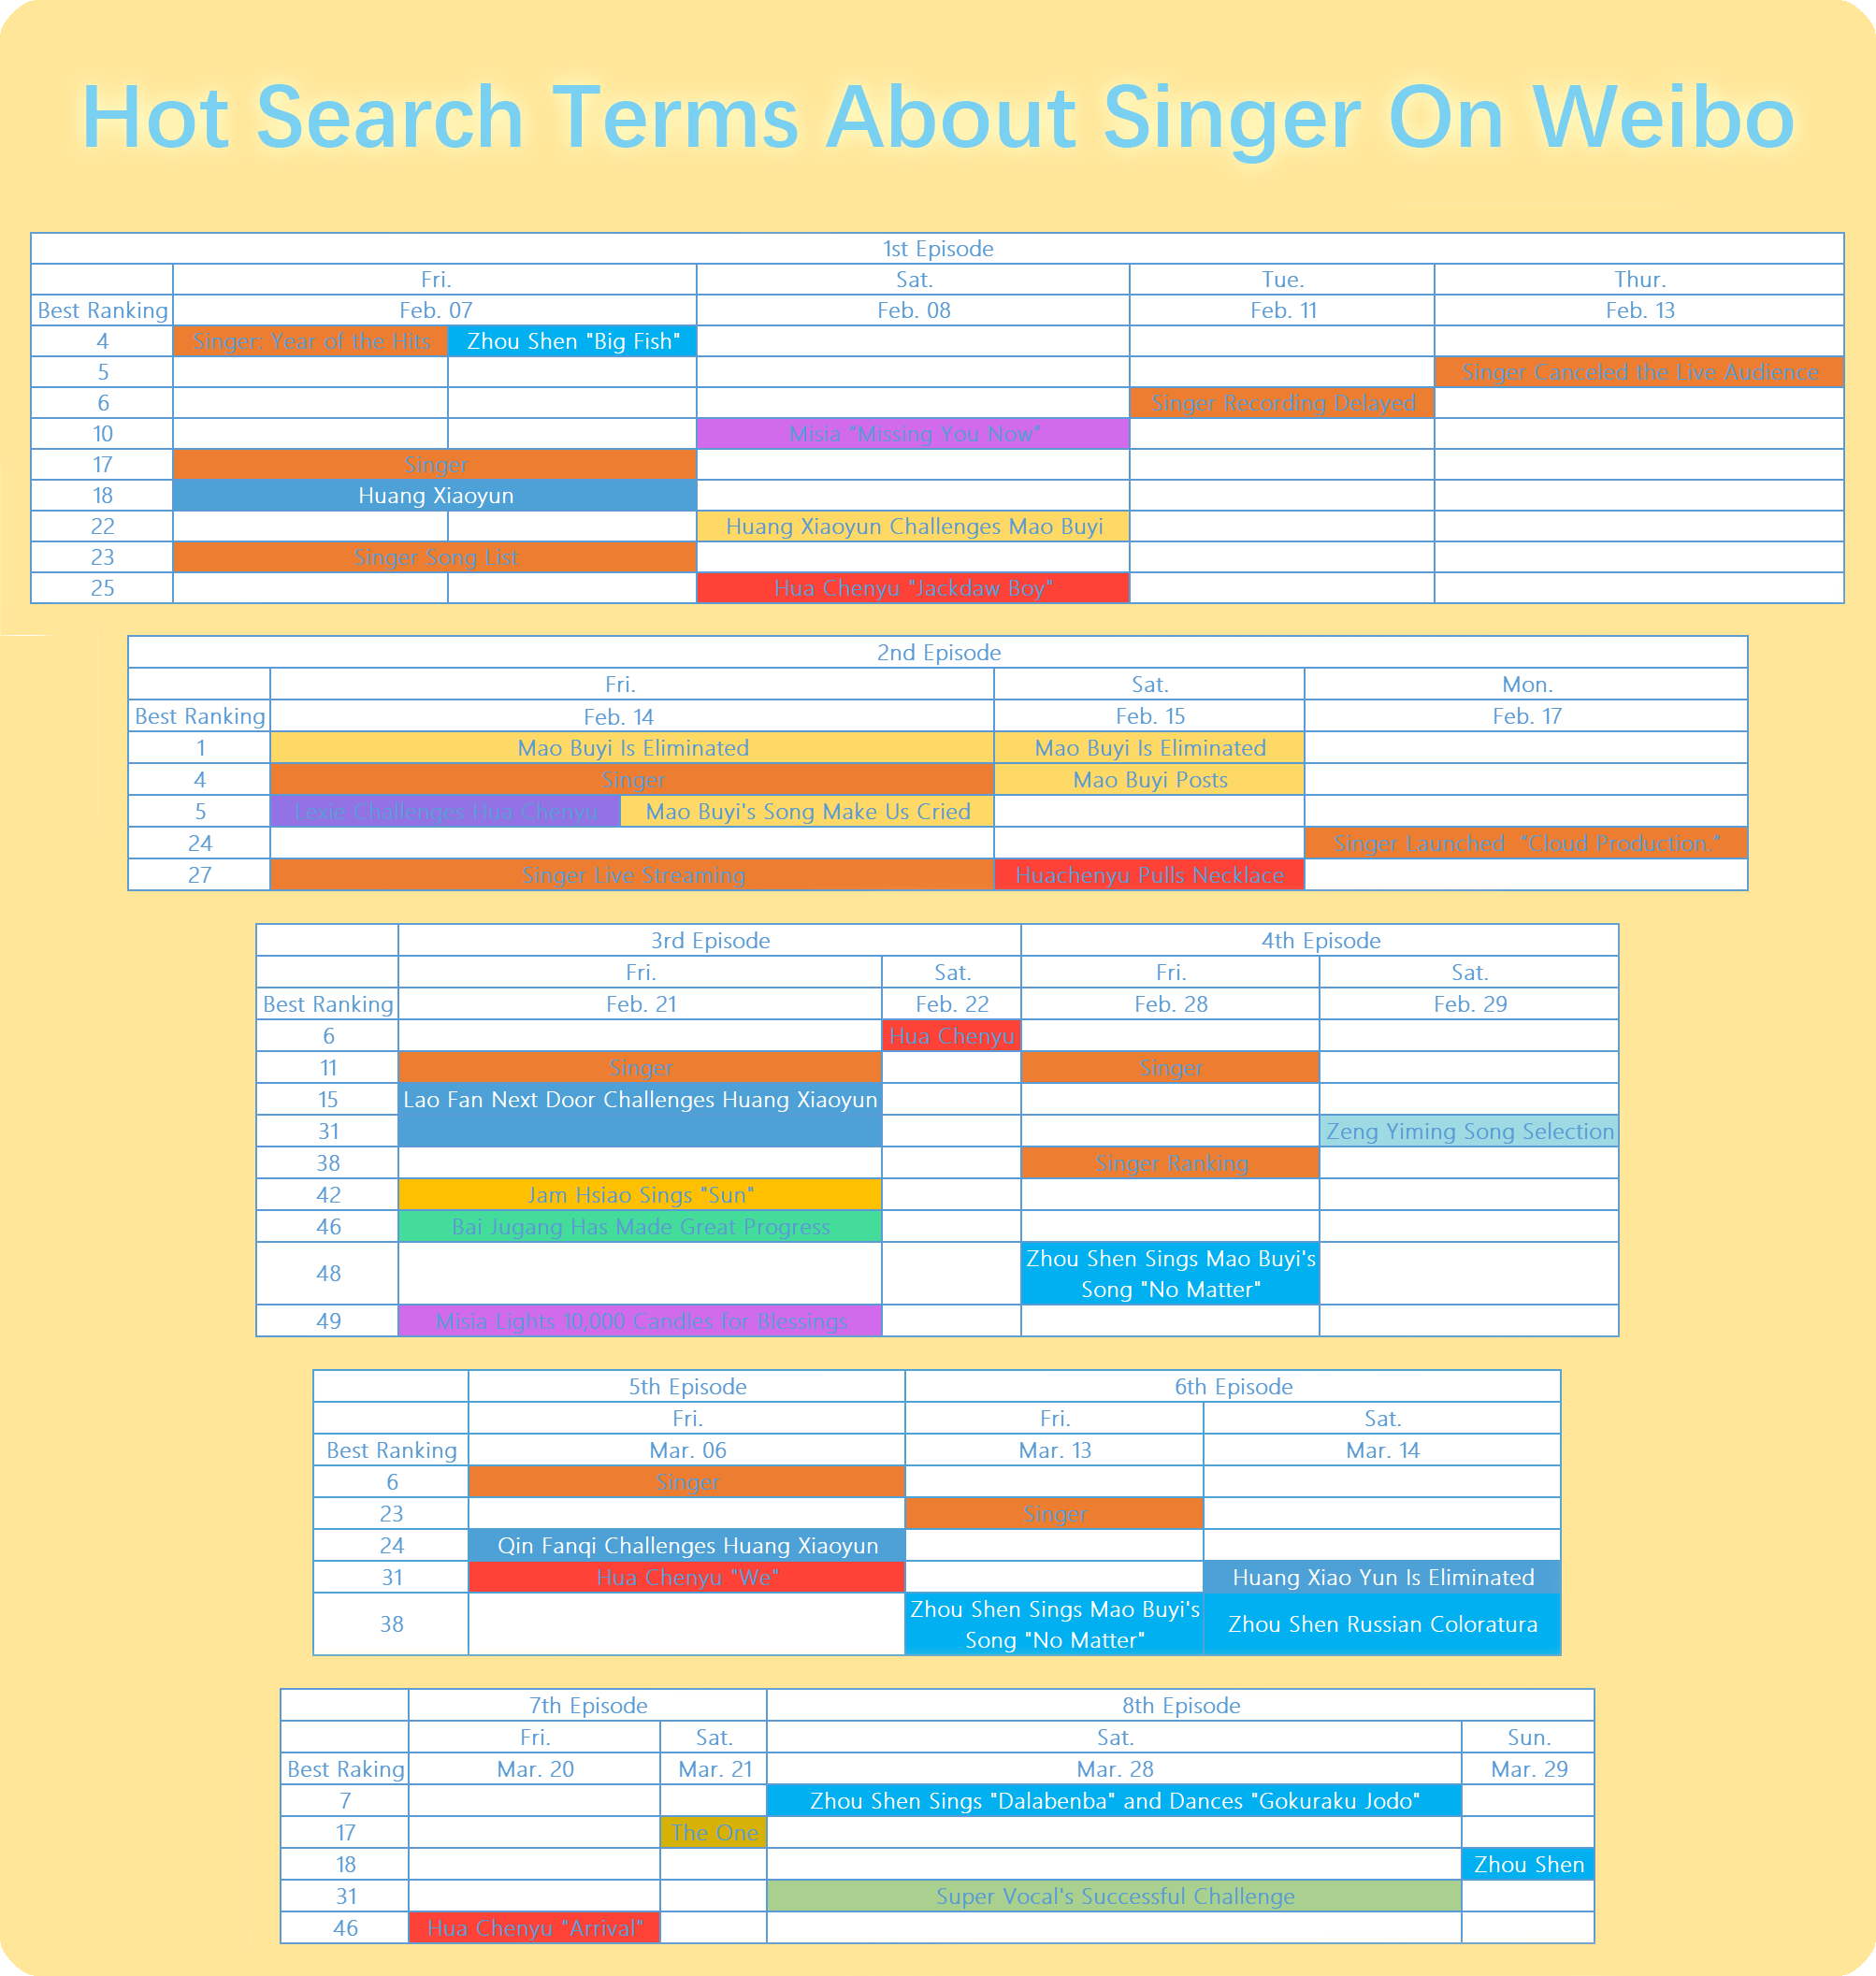 "Singer 2020" - 29 Hot Search Terms On Weibo